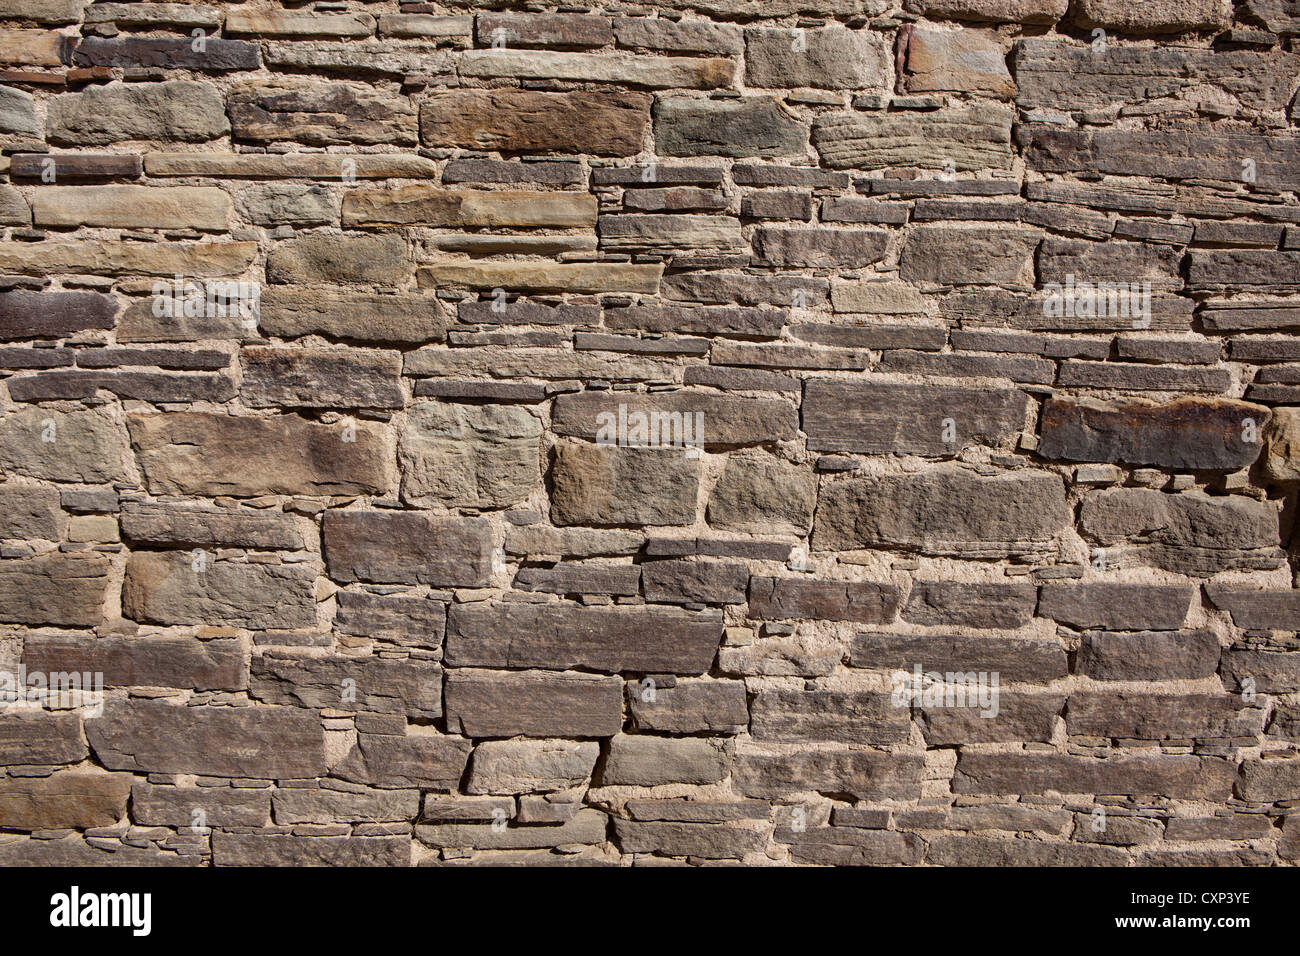 Close up Type III Masonry wall from the Salmon Chacoan ruin site in New Mexico Stock Photo